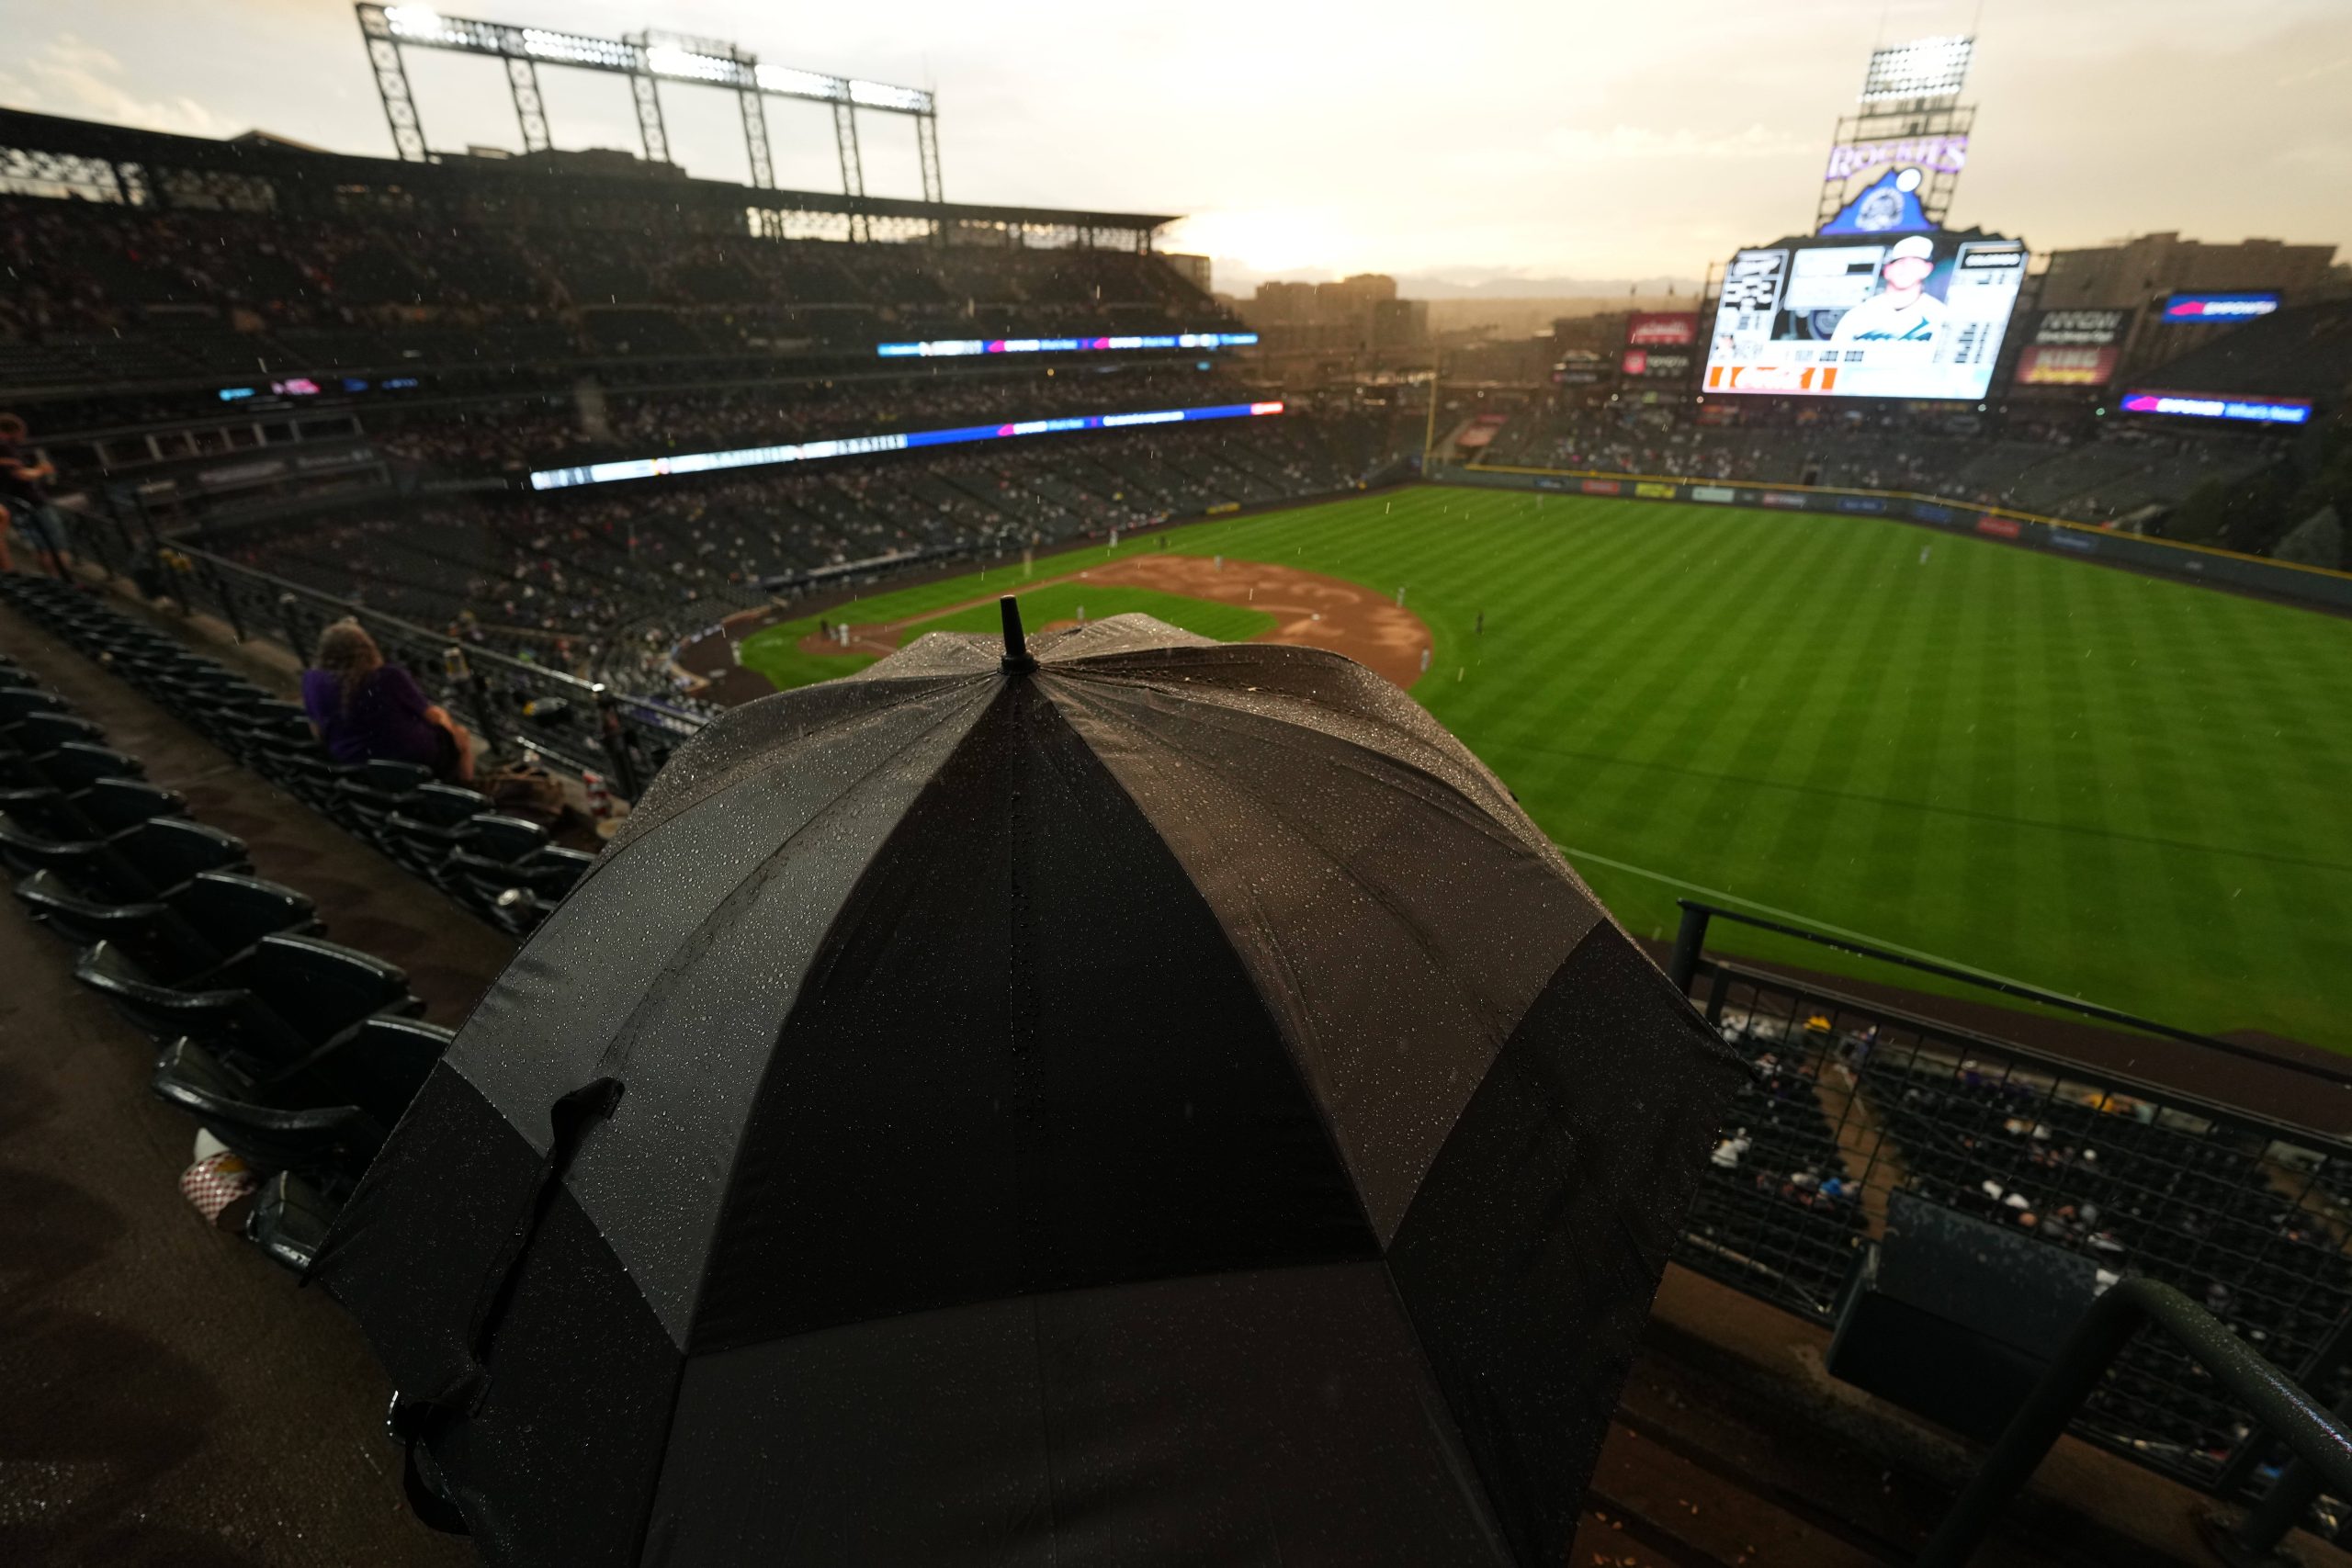 Rockies still have faithful fans despite yearly struggles to contend